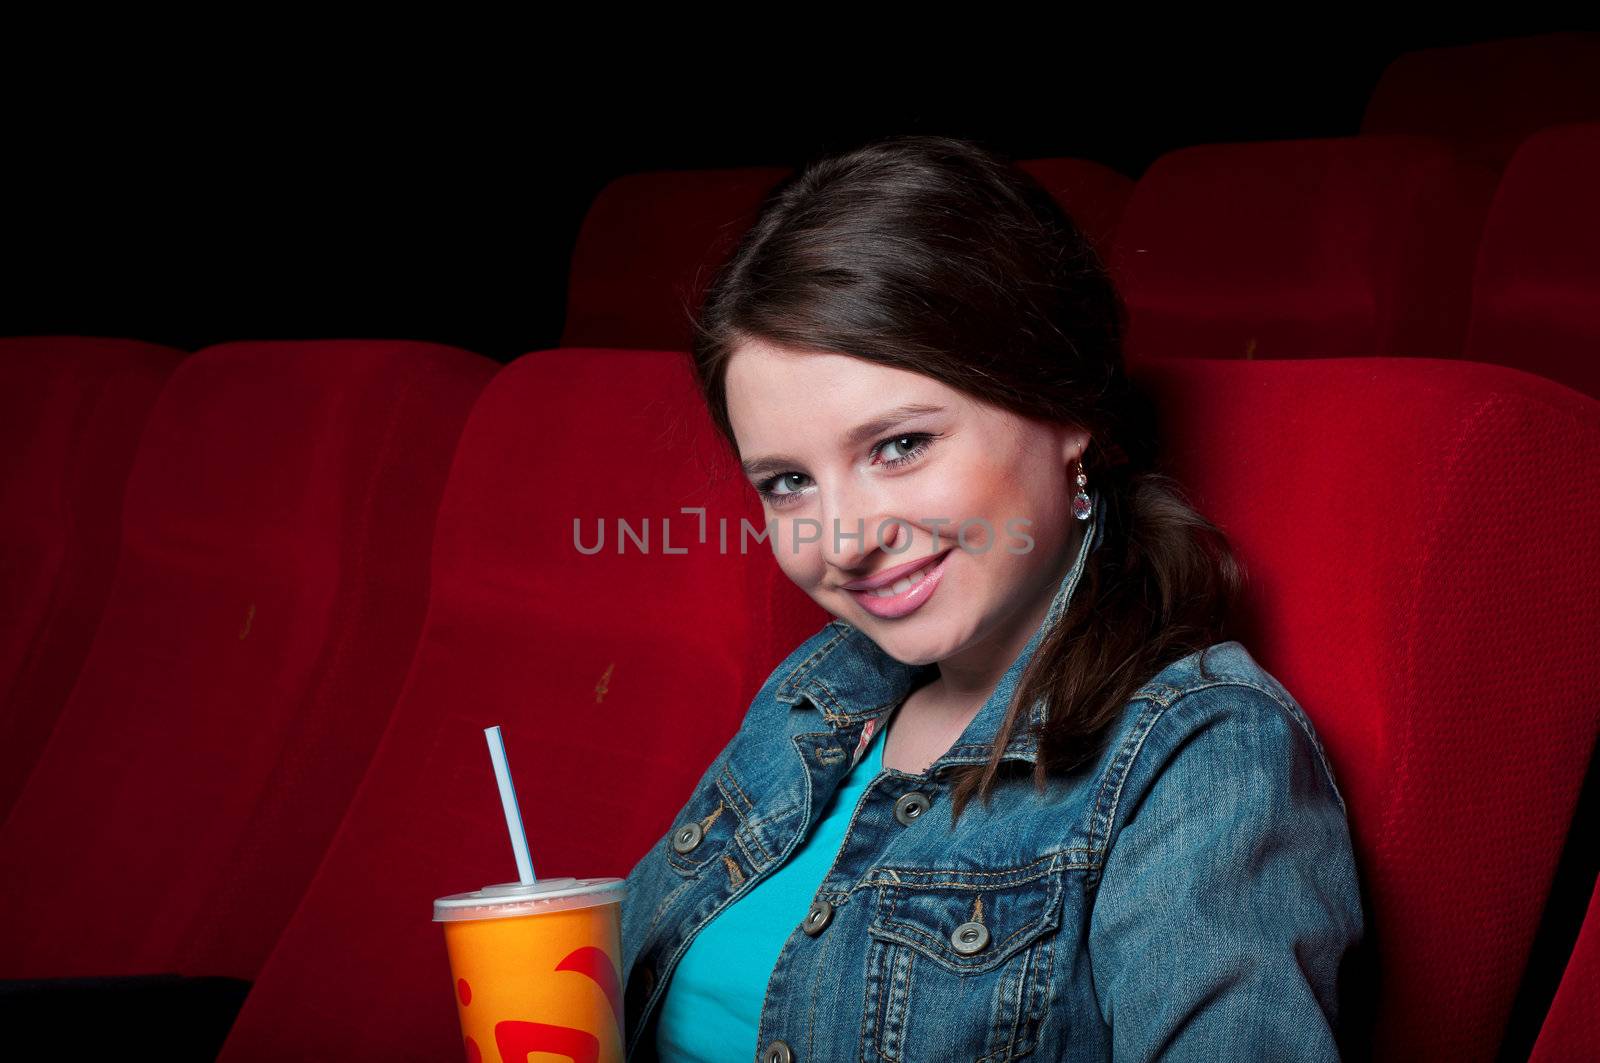 portrait of a beautiful woman in a movie theater, holding a glass of drink